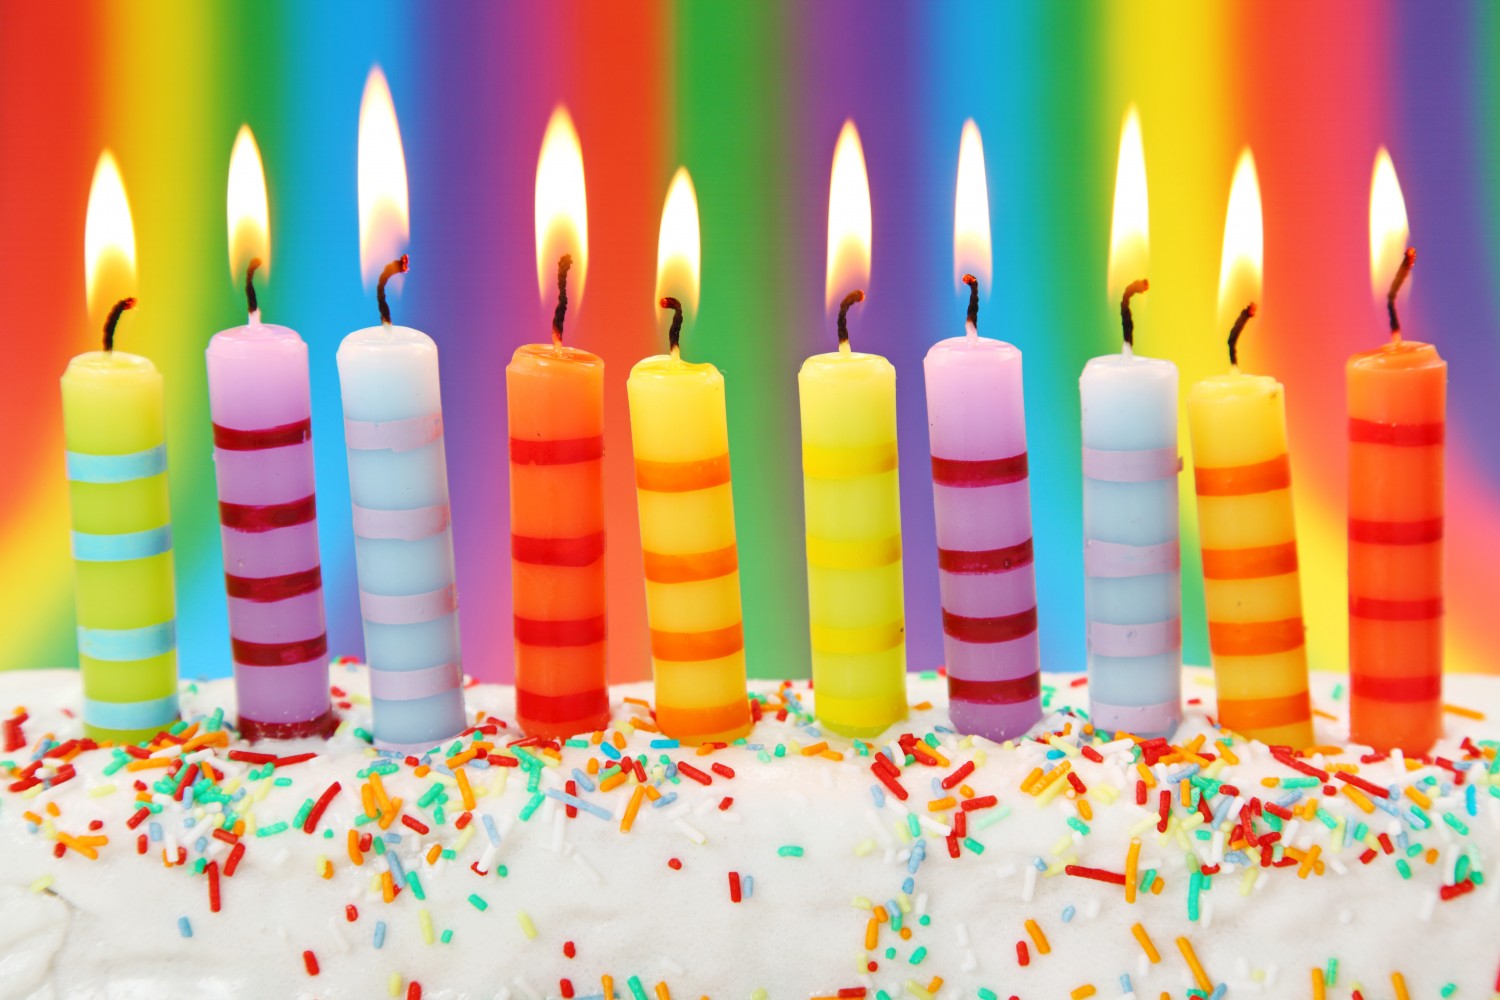 These 25 Restaurants And Stores Will Give You Free Stuff On Your Birthday